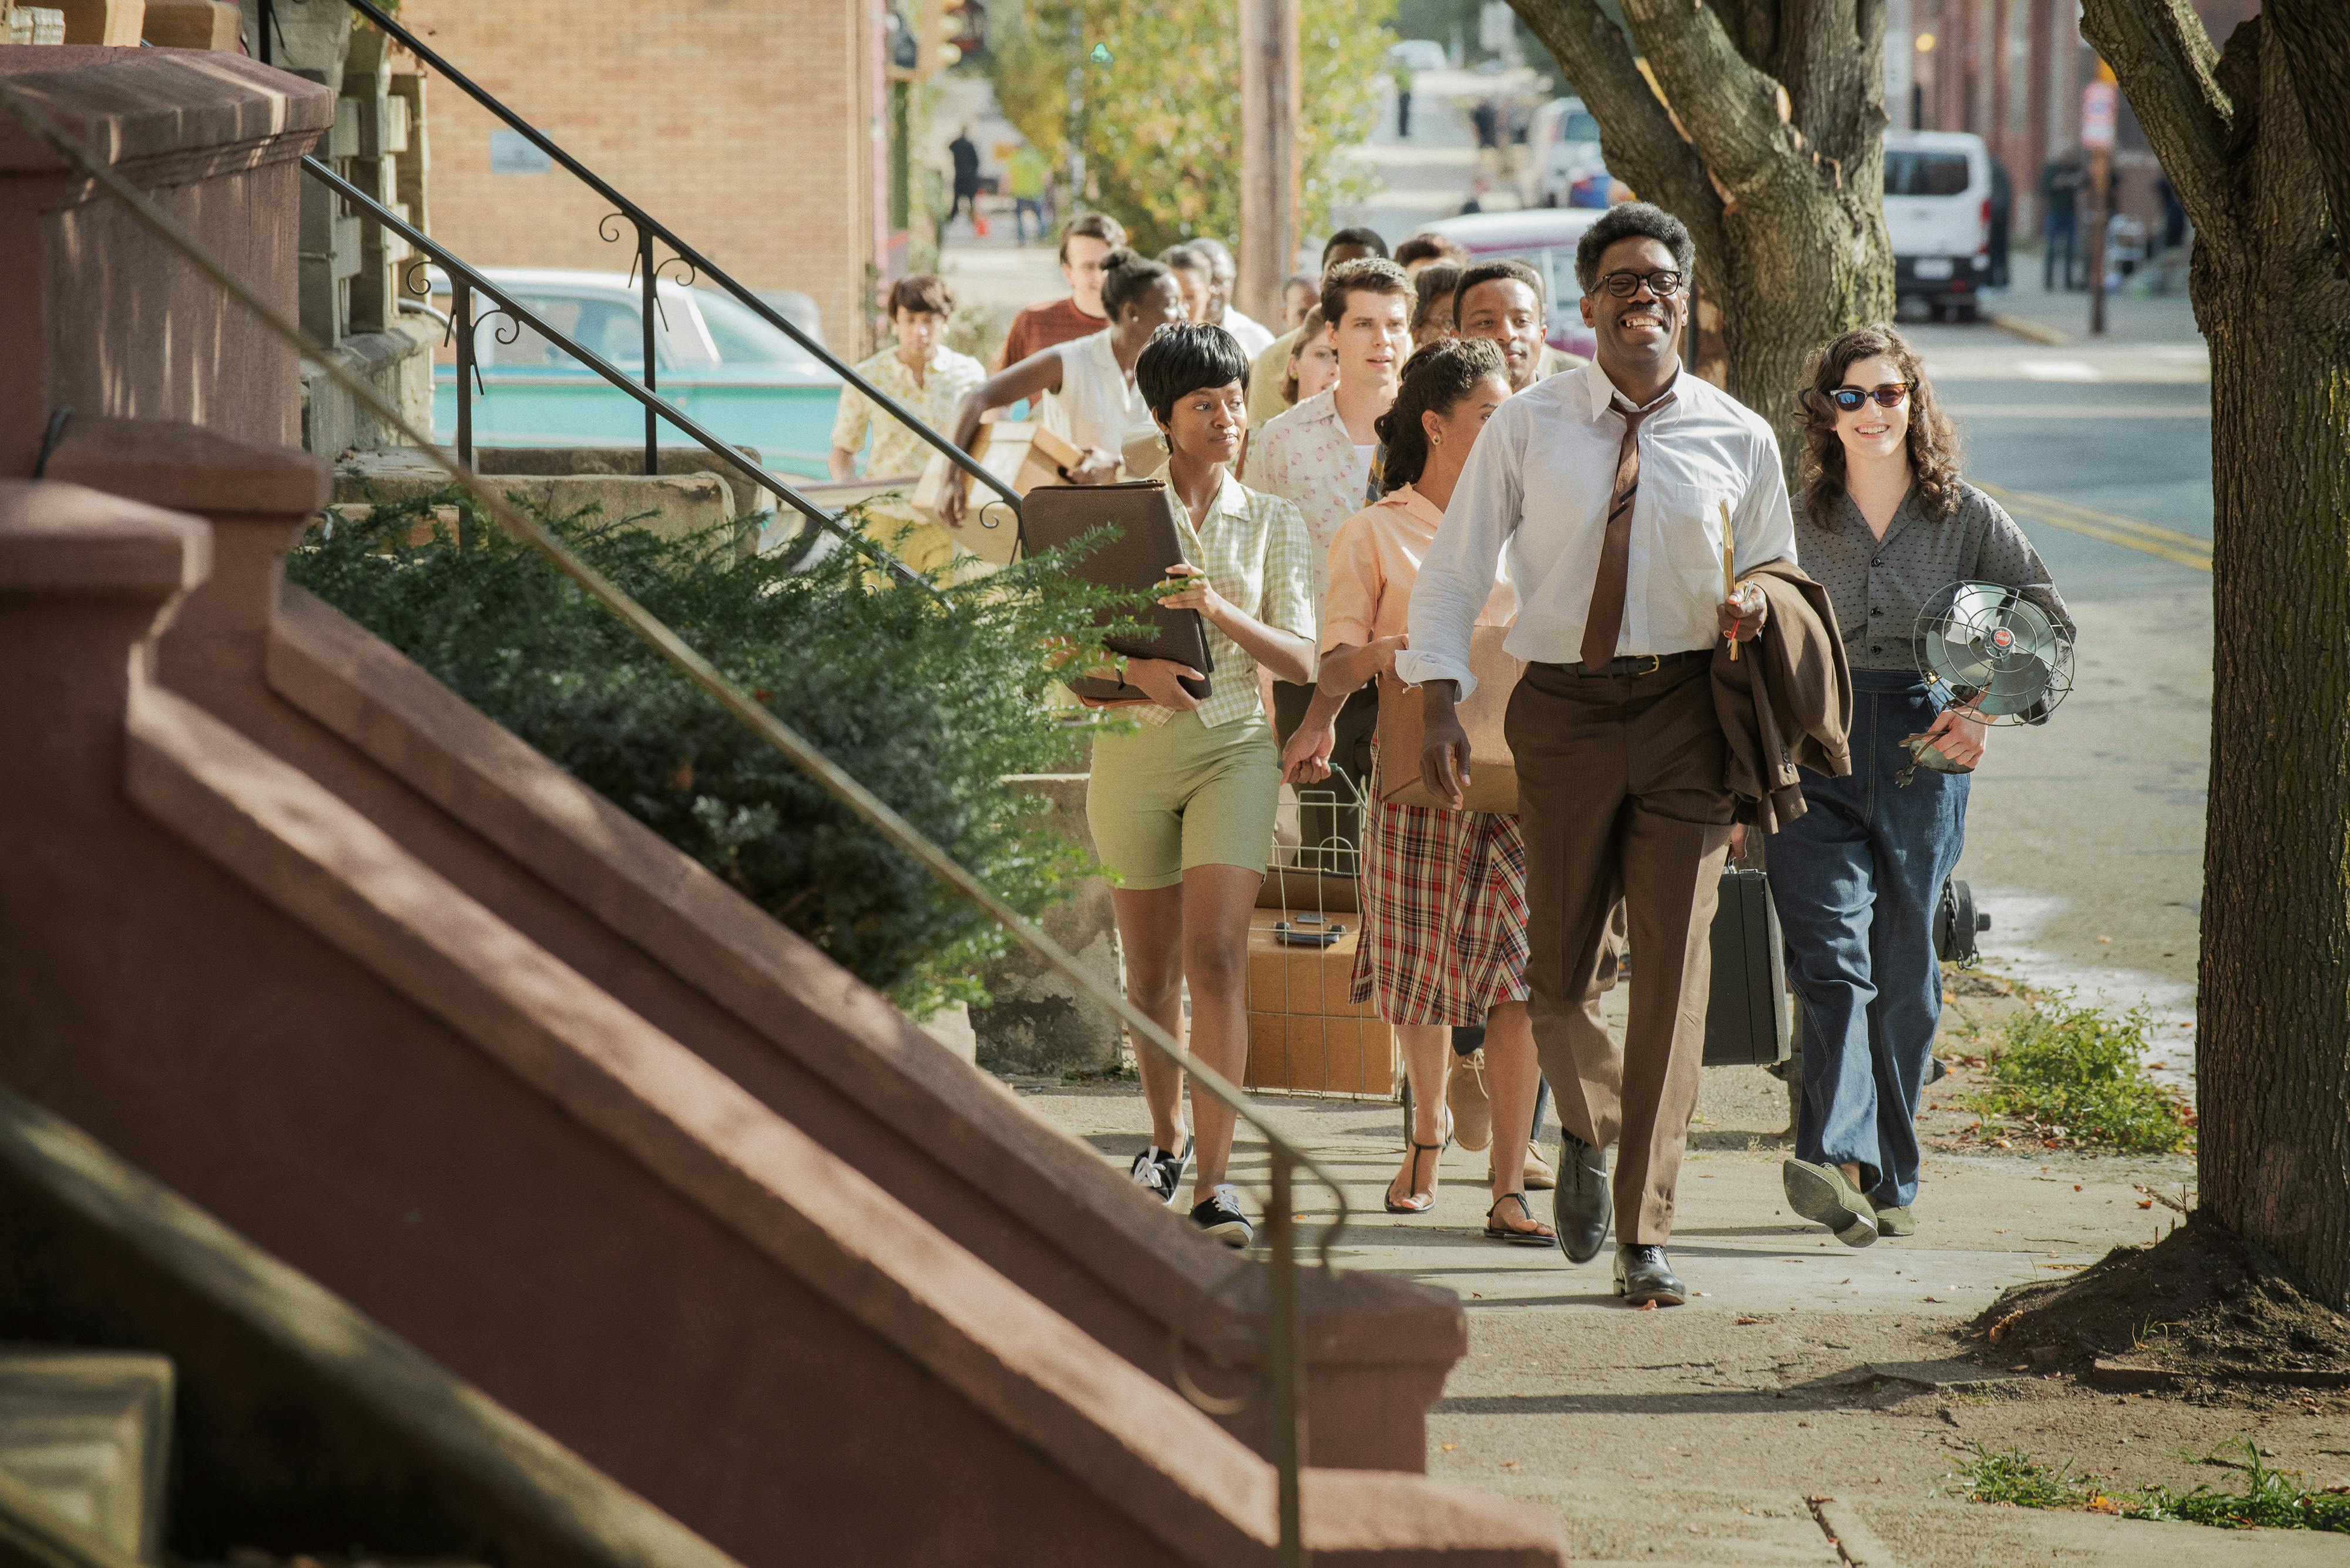 Bayard Rustin (Colman Domingo) marches along a city sidewalk with a crowd of people following him.